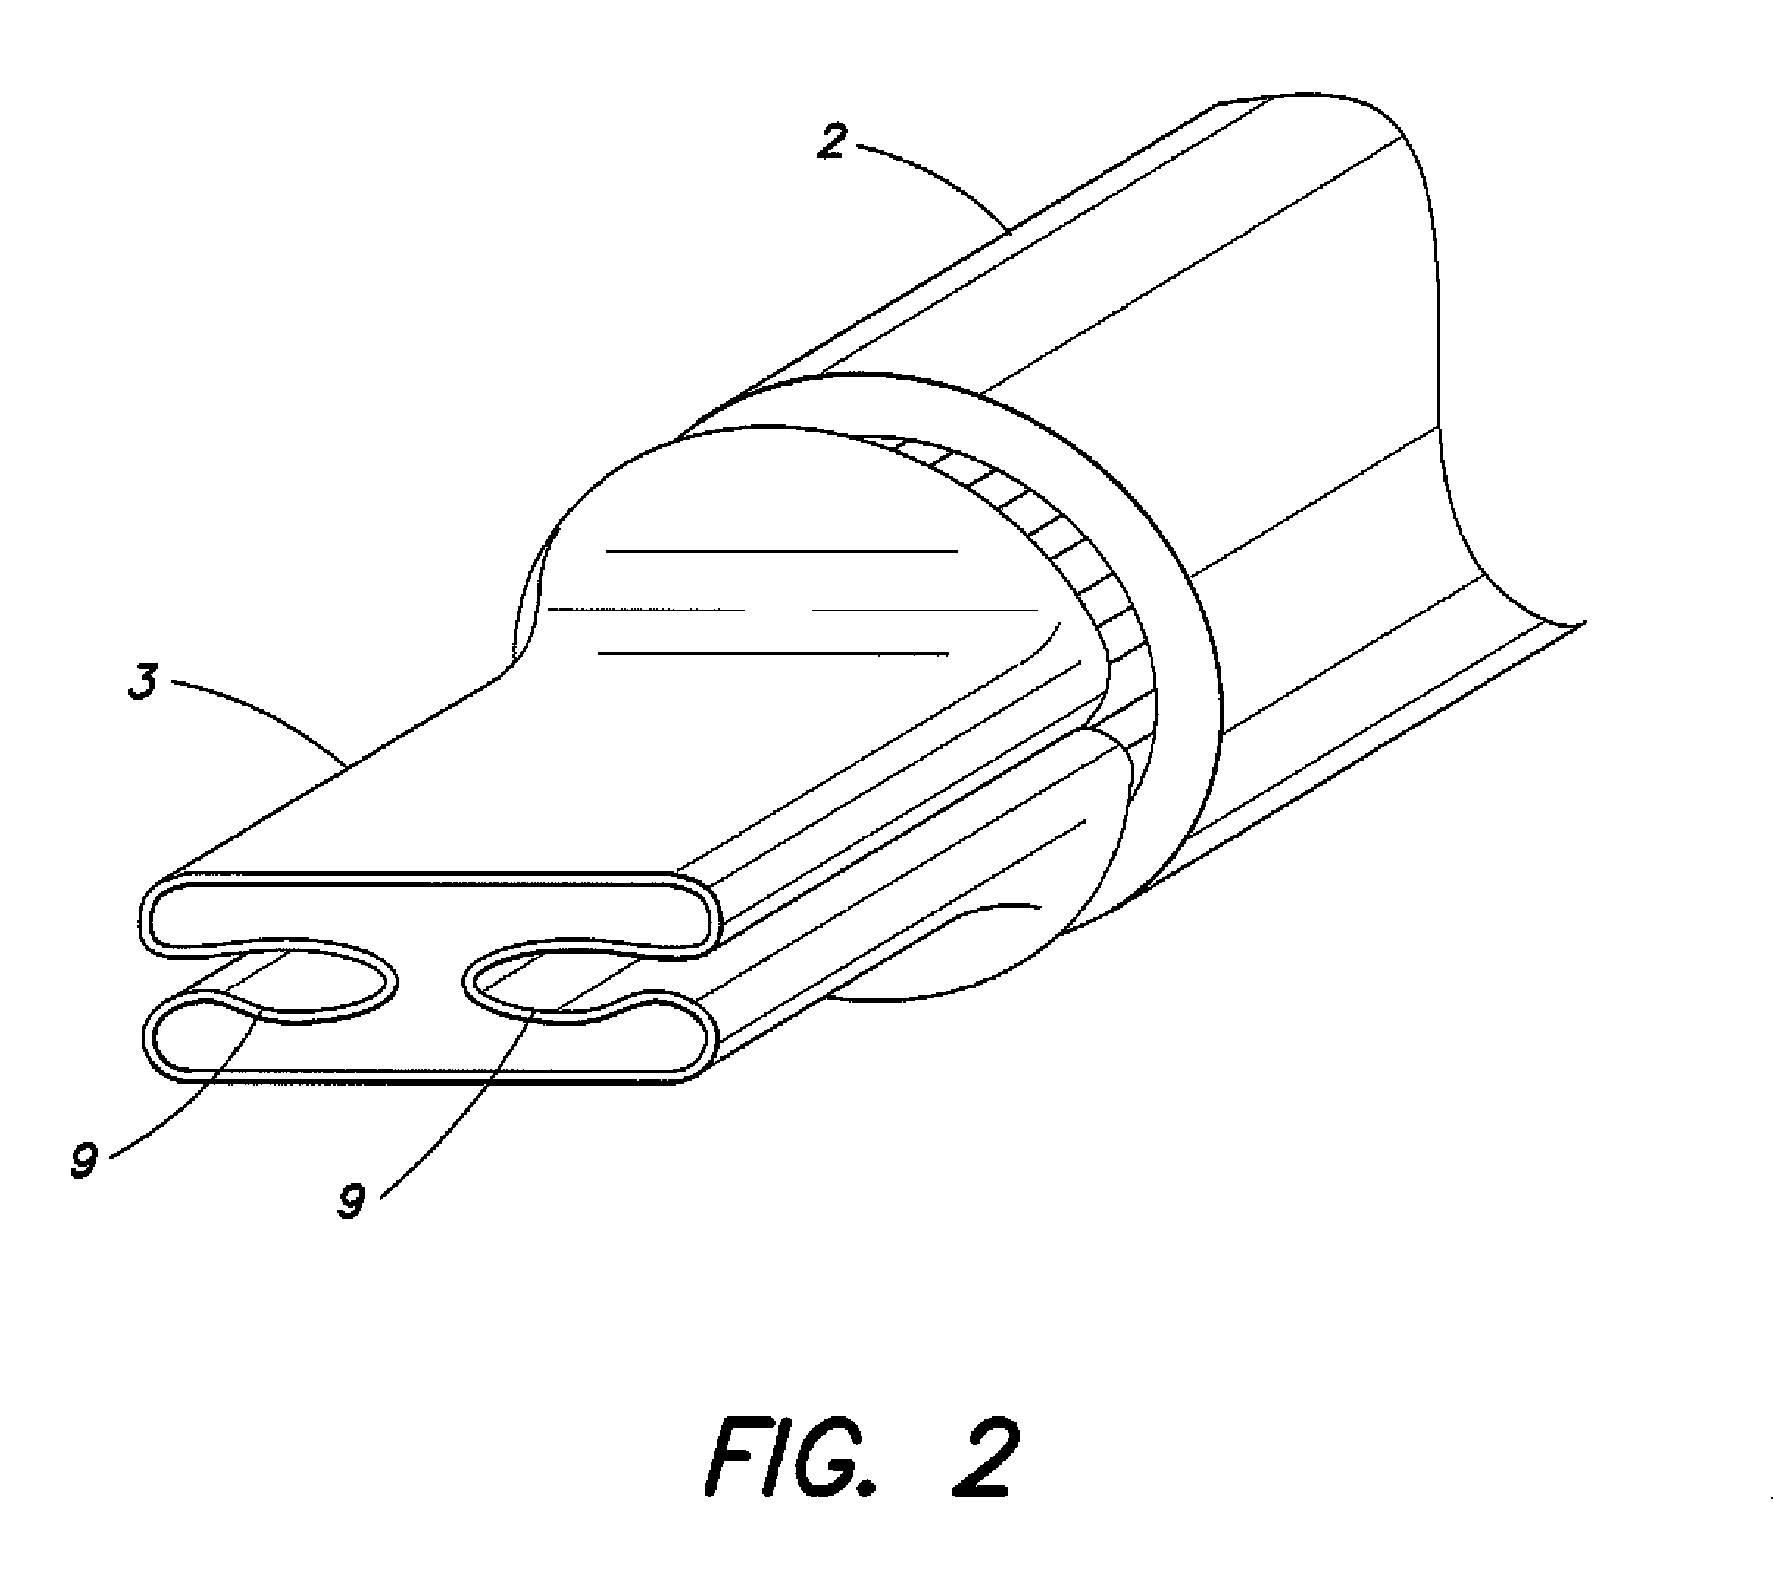 Connector for use with light-weight metal conductors